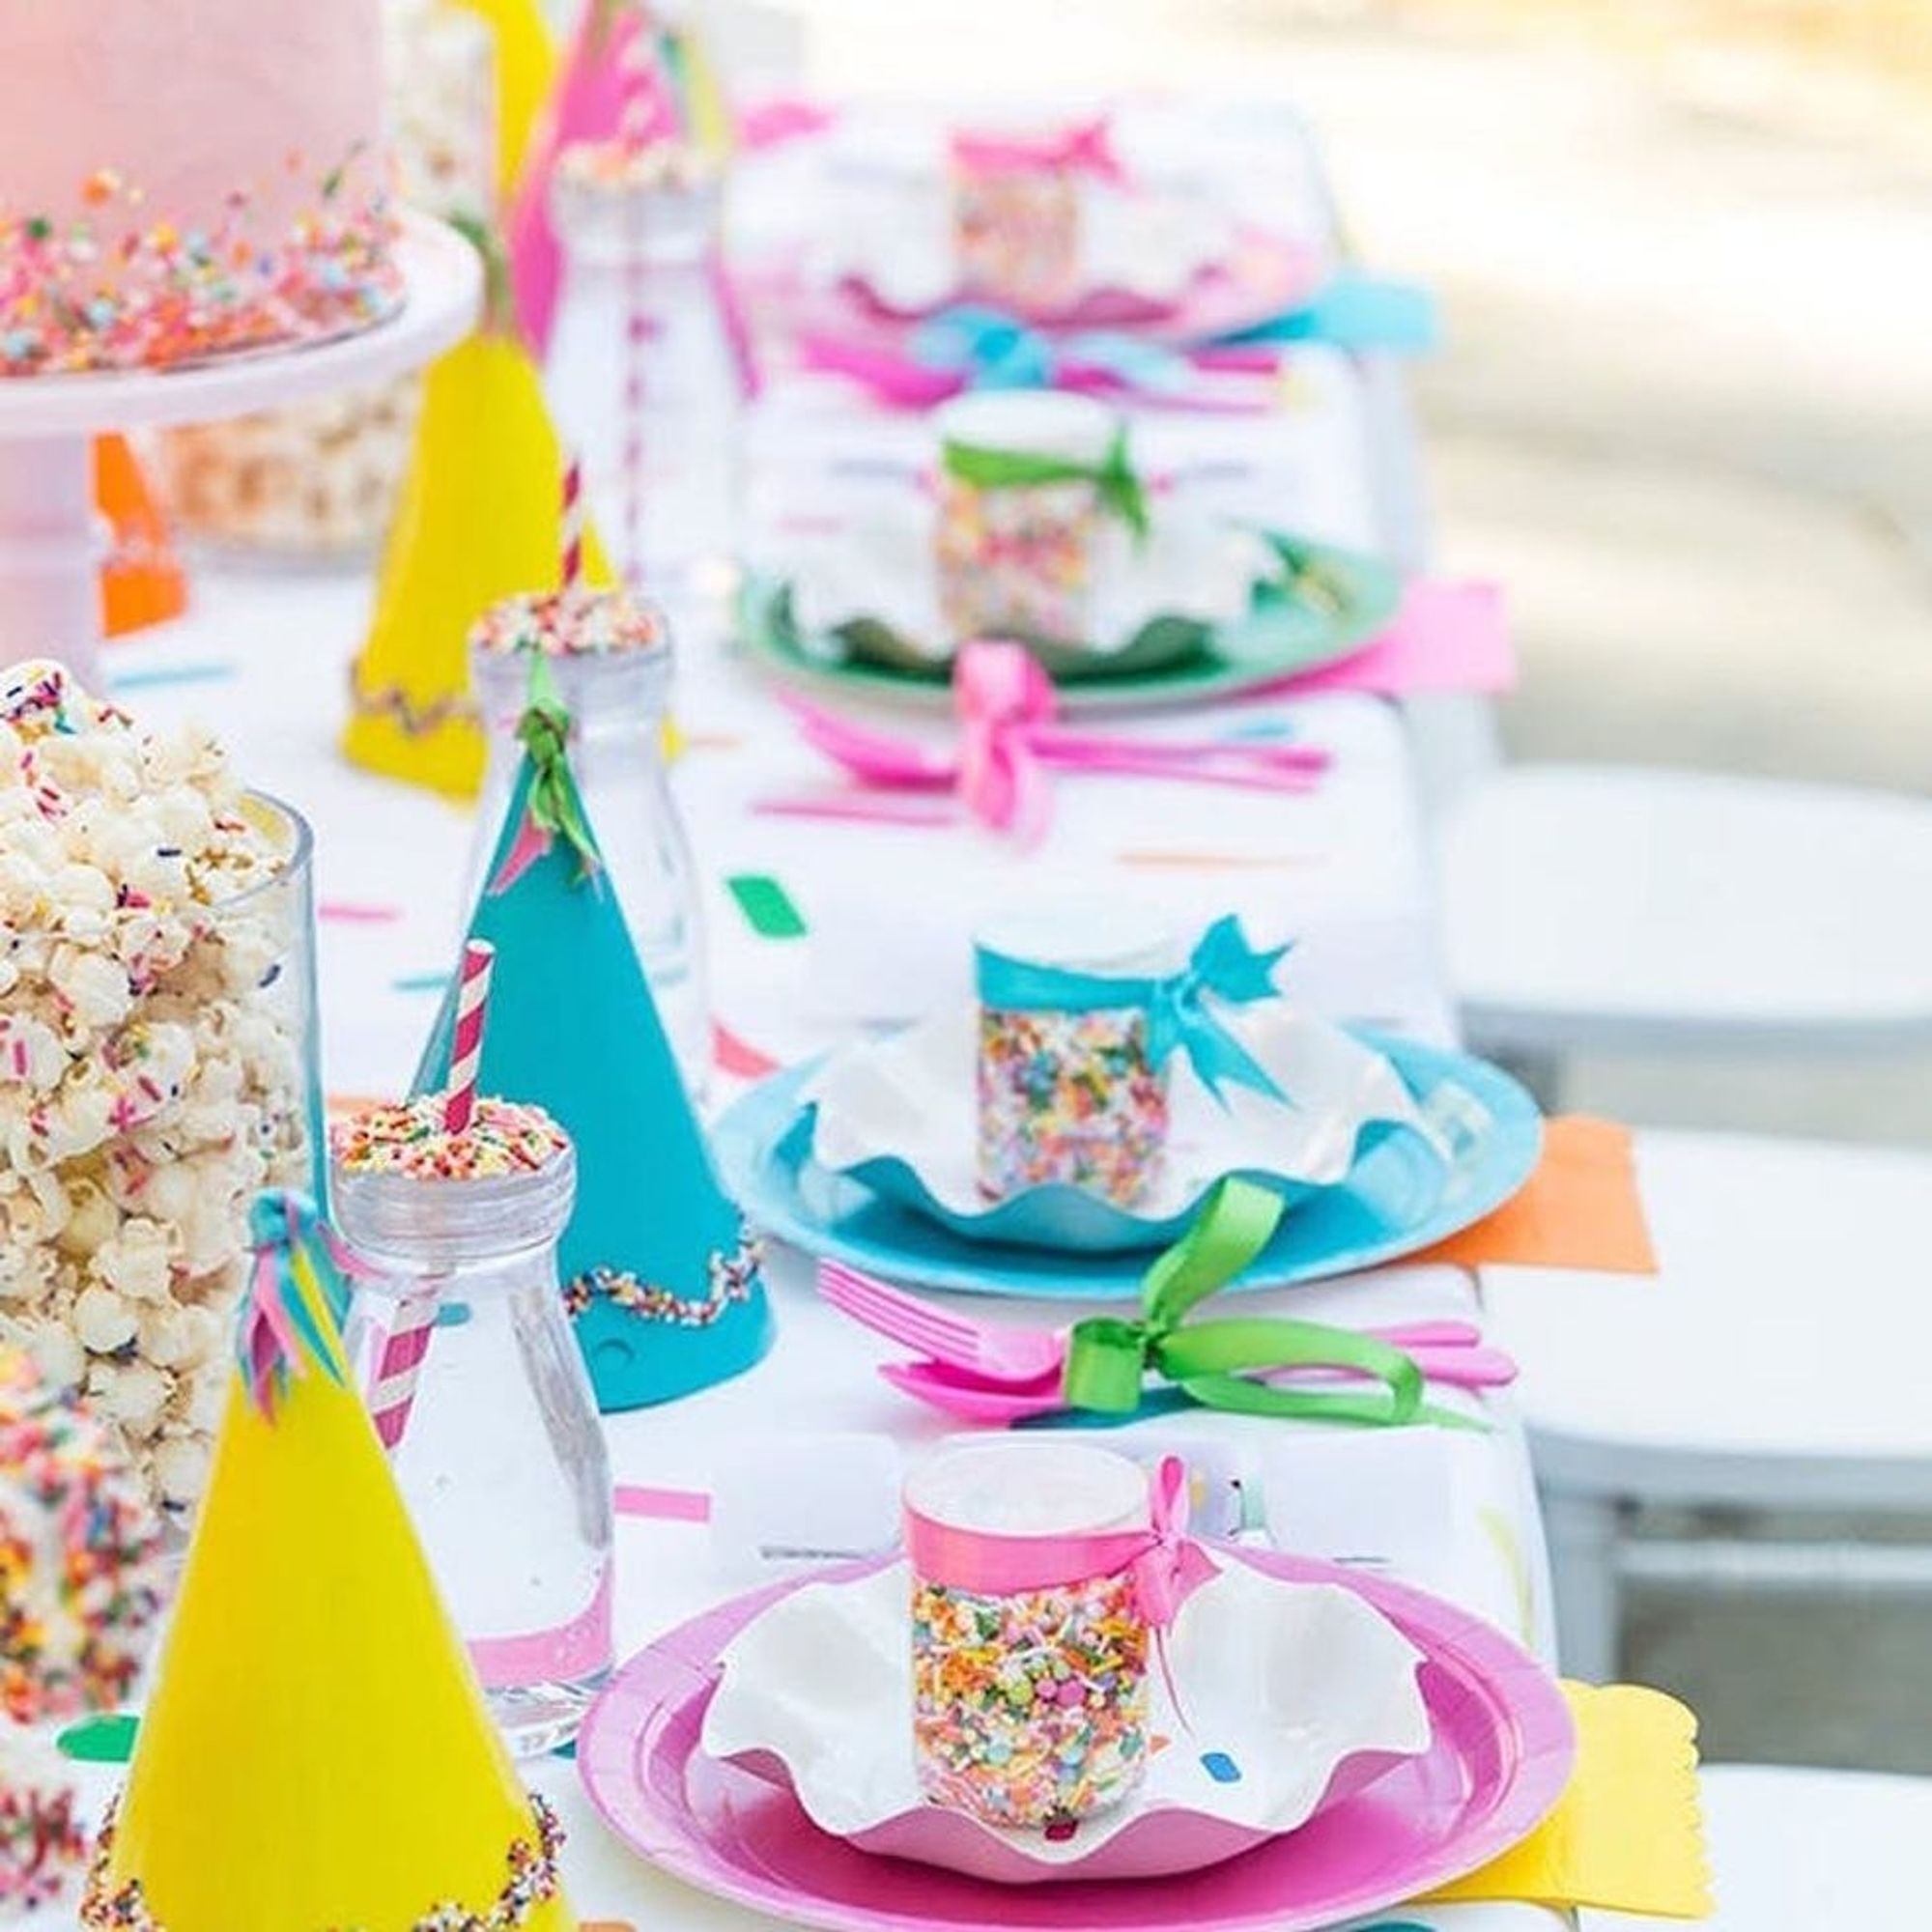 10 Kid Party Themes That Are Too Cute for Words - Brit + Co